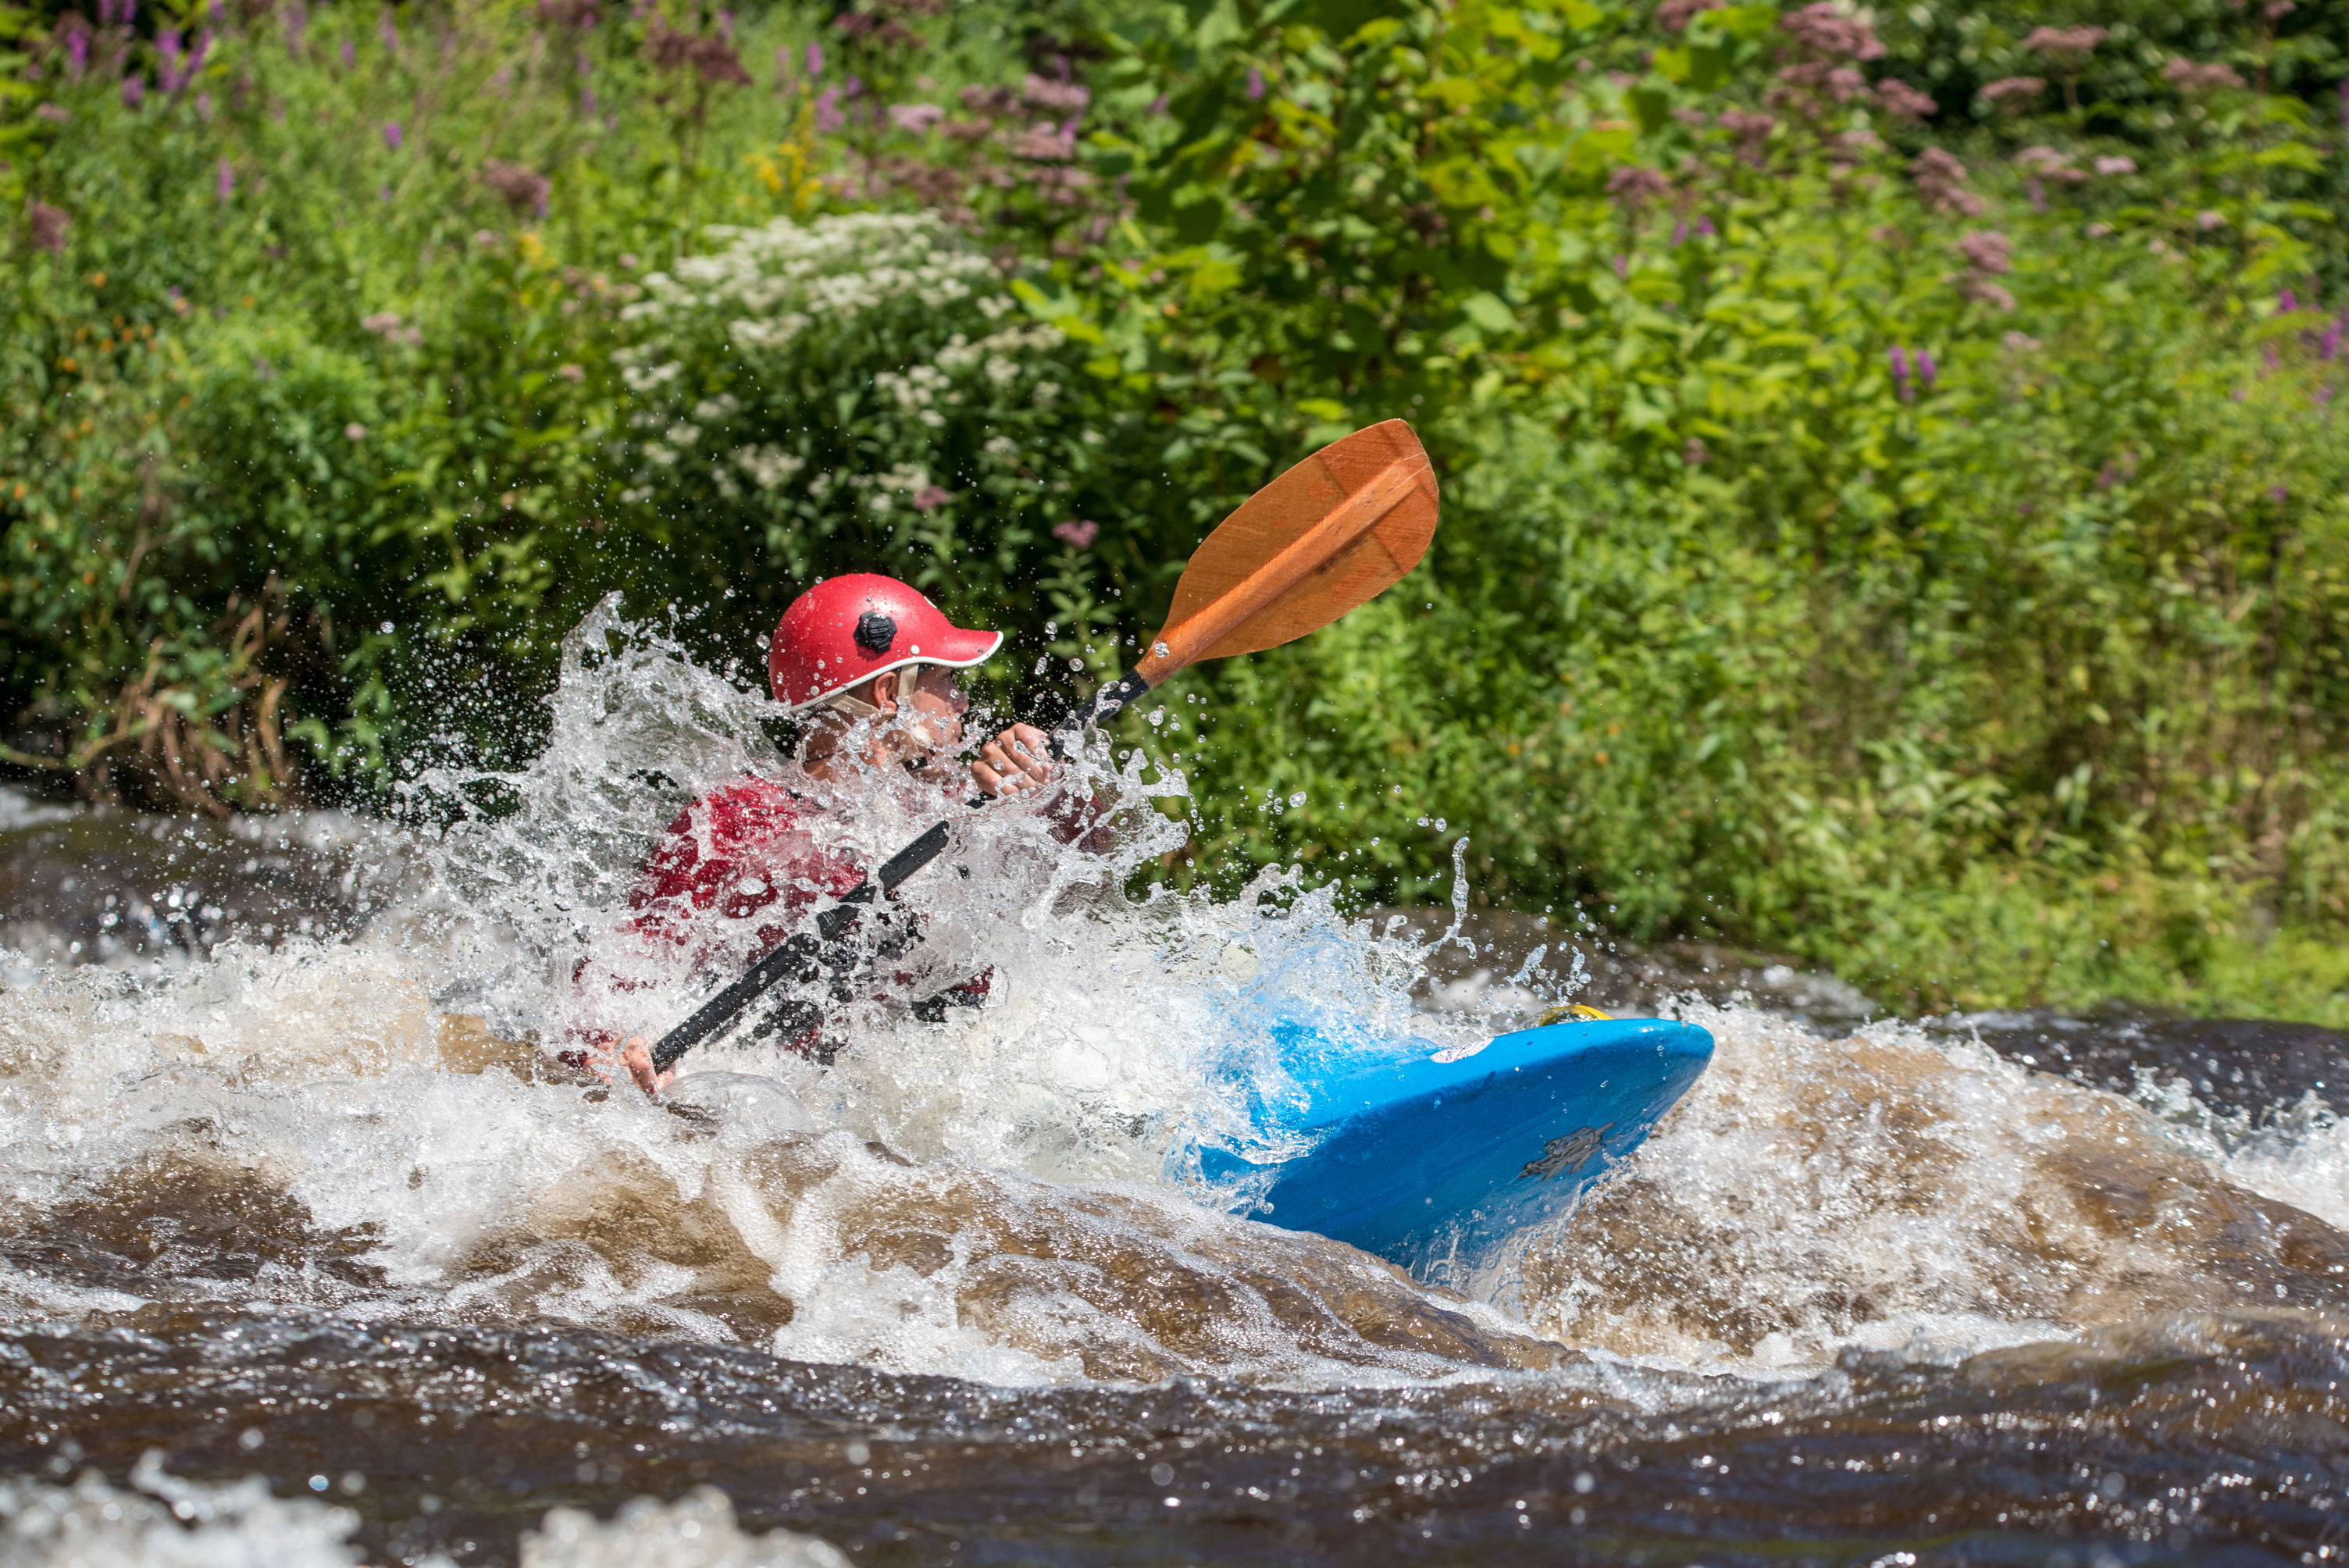 A kayaker rides a river's white water rapids